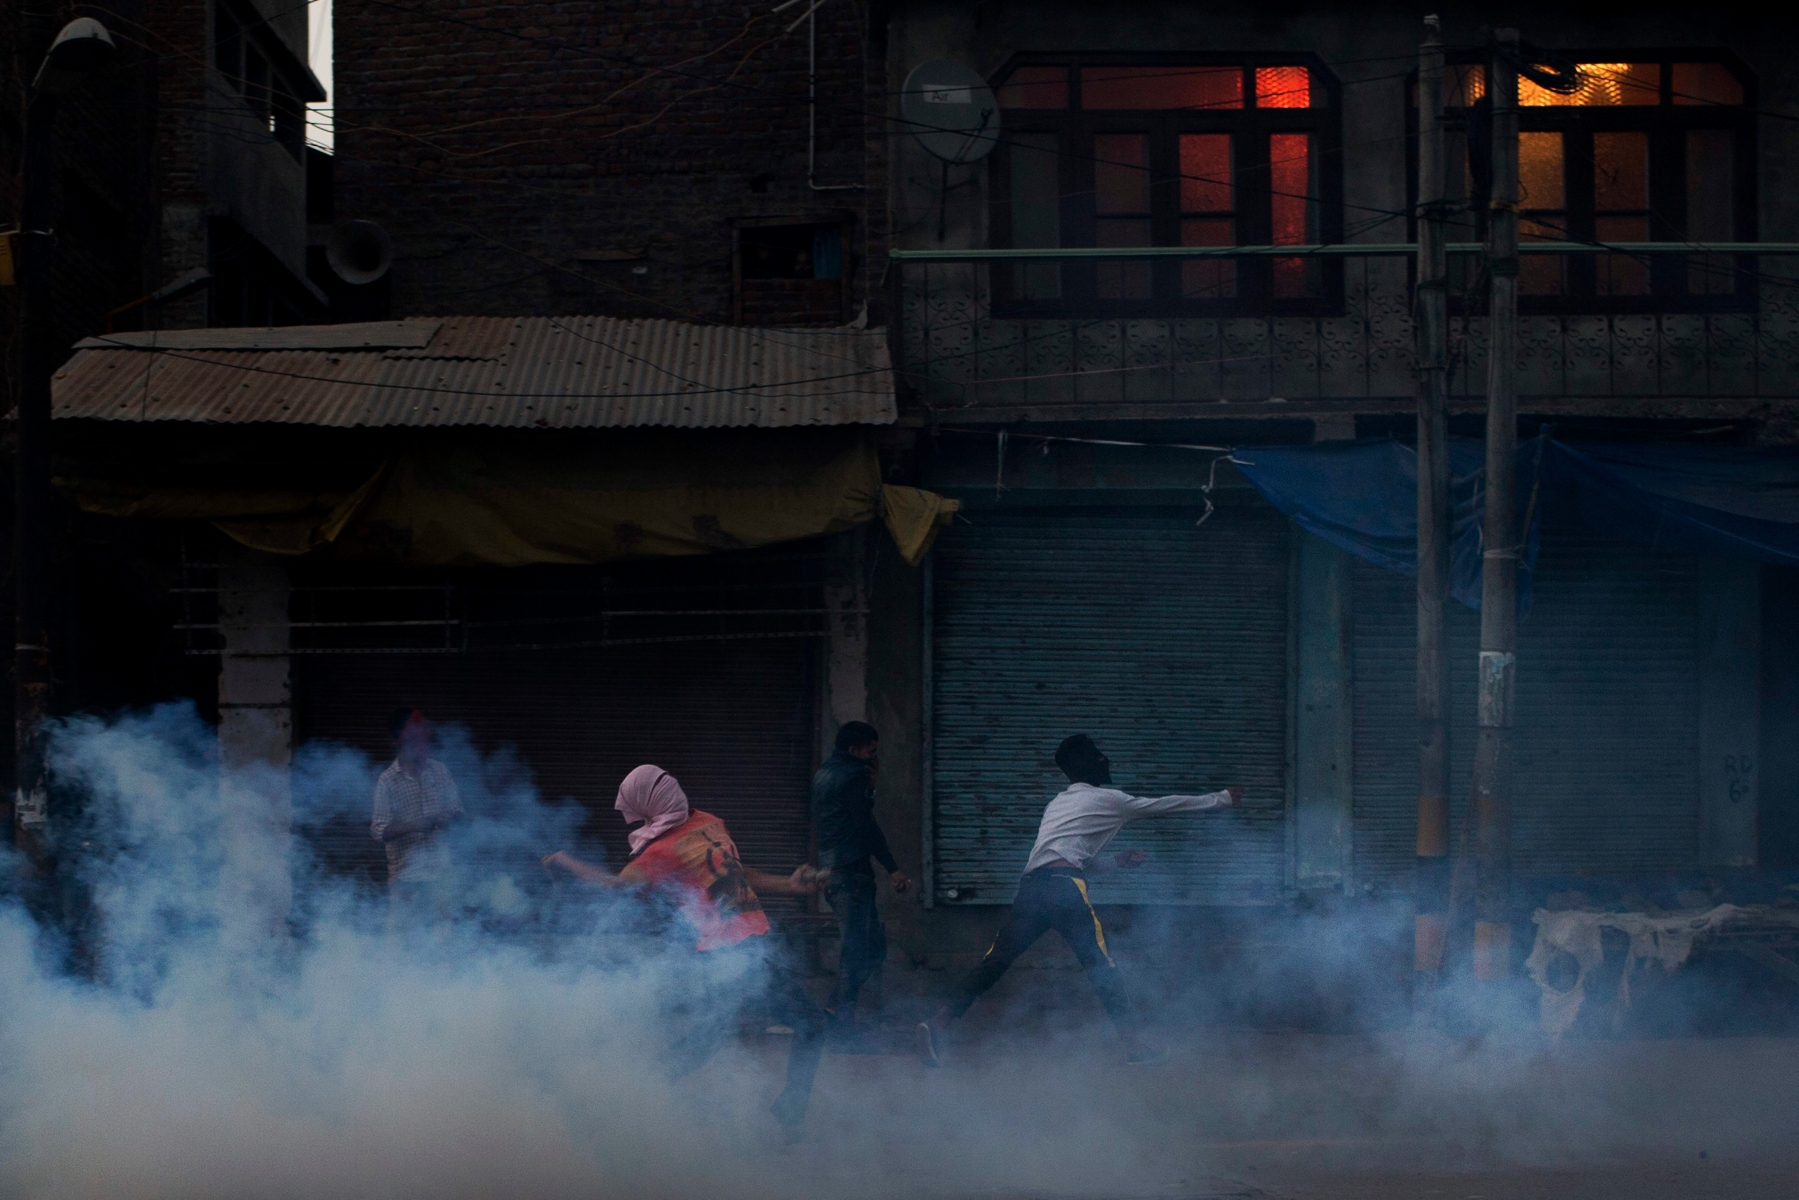 Kashmiri protesters prepare to throw exploded tear gas shell back at Indian police men during a protest after funeral prayers in absentia for Pakistani soldiers killed in cross border firing in Srinagar, Indian controlled Kashmir, Thursday, Sept. 29, 2016. Pakistan on Thursday said two of its soldiers were killed in an "unprovoked" attack when India fired across the border of the disputed region of Kashmir, while India said it had carried out a "surgical strike" against terrorists, in an exchange that marks an escalation in tensions between the uneasy and nuclear-armed neighbors. Pakistan and India often trade fire in Kashmir, a Himalayan region that is split between the two countries and claimed by both in its entirety. (AP Photo/Dar Yasin) India Pakistan Kashmir